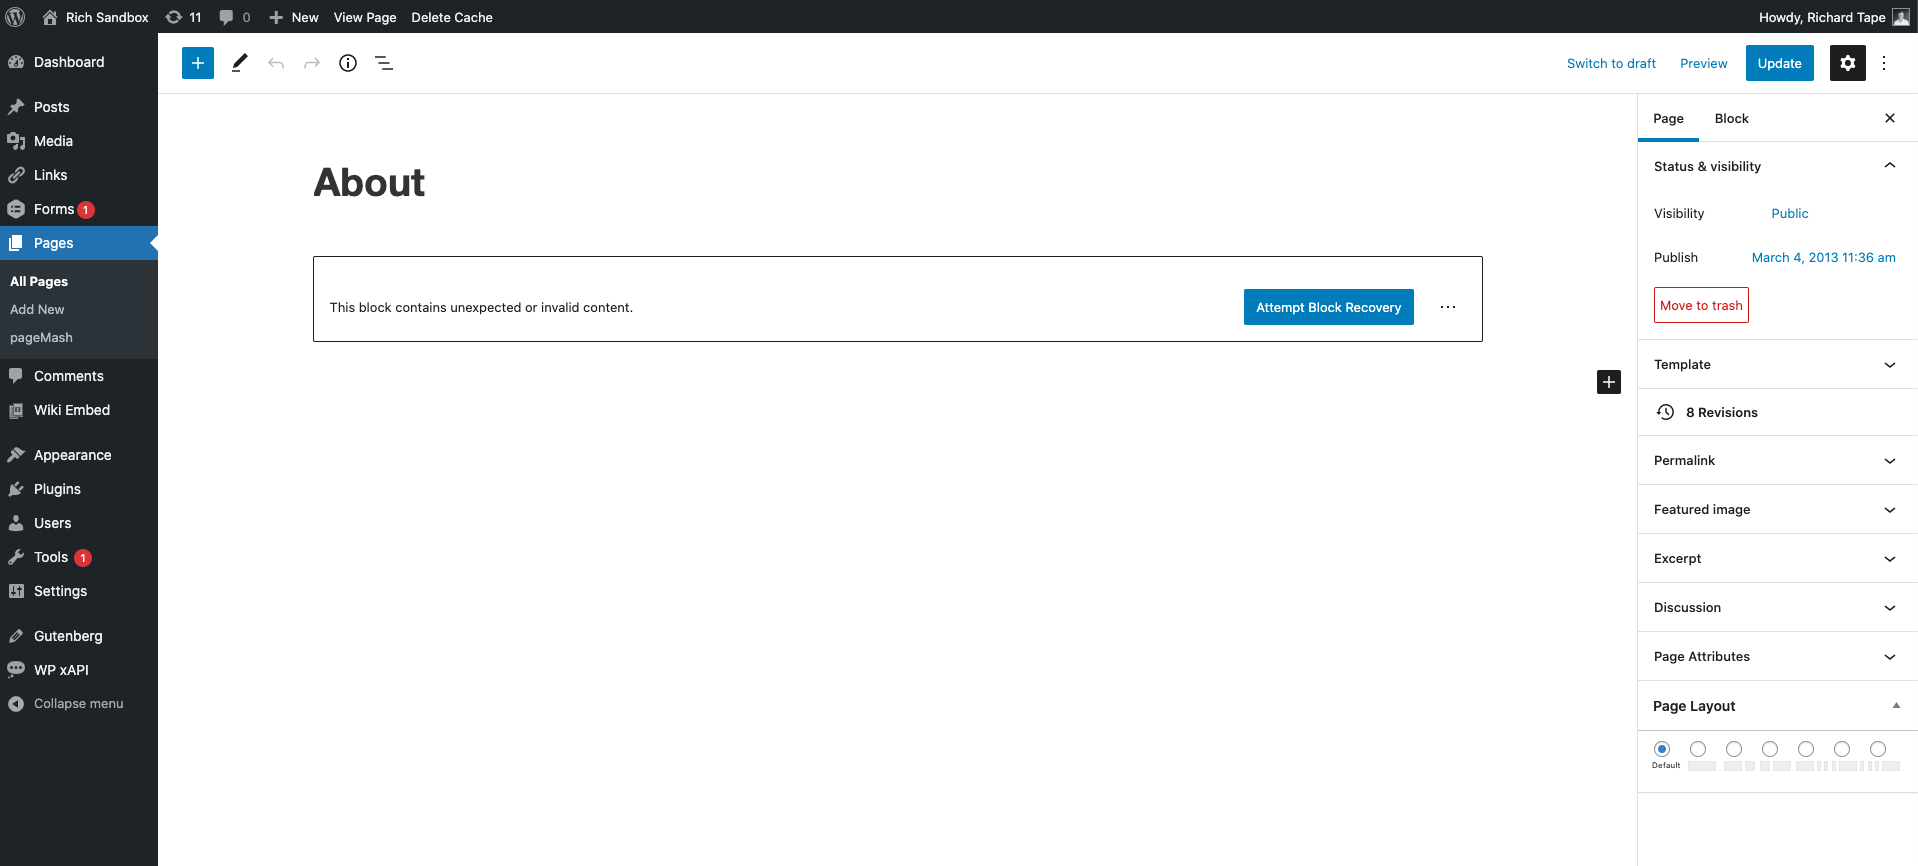 A screenshot showing the back end of WordPress with a warning saying the “This block contains unexpected or invalid content.” and a button which says “Attempt Block Recovery”.